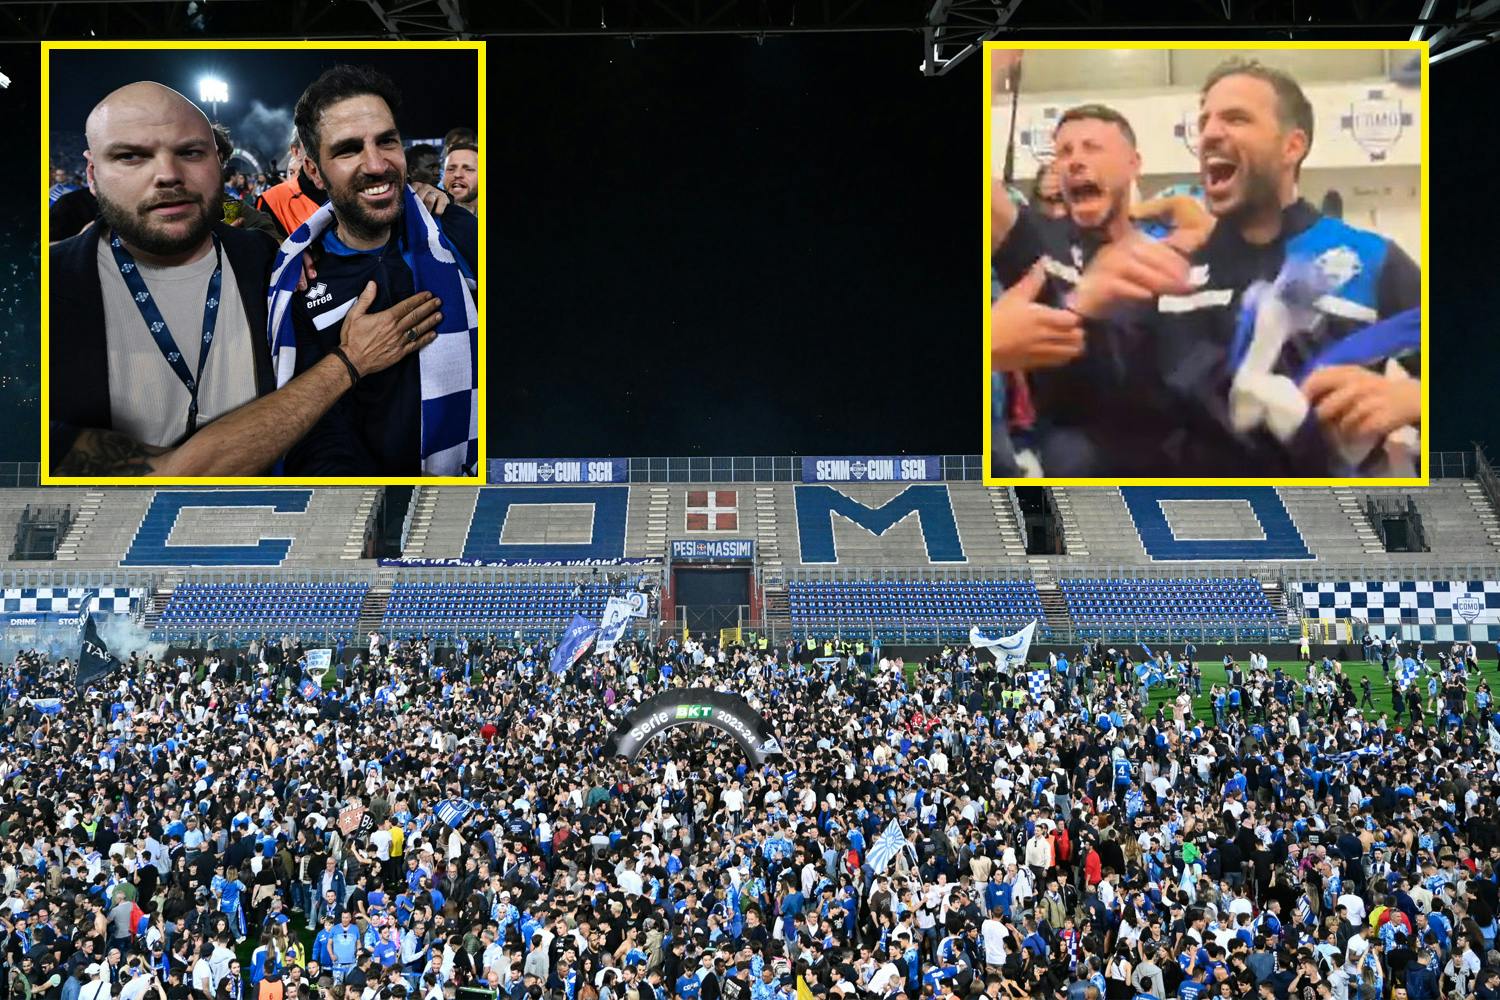 Como_1907 Promoted to Serie A with Gioacchini, Wise, Fàbregas, and Henry at New Stadium